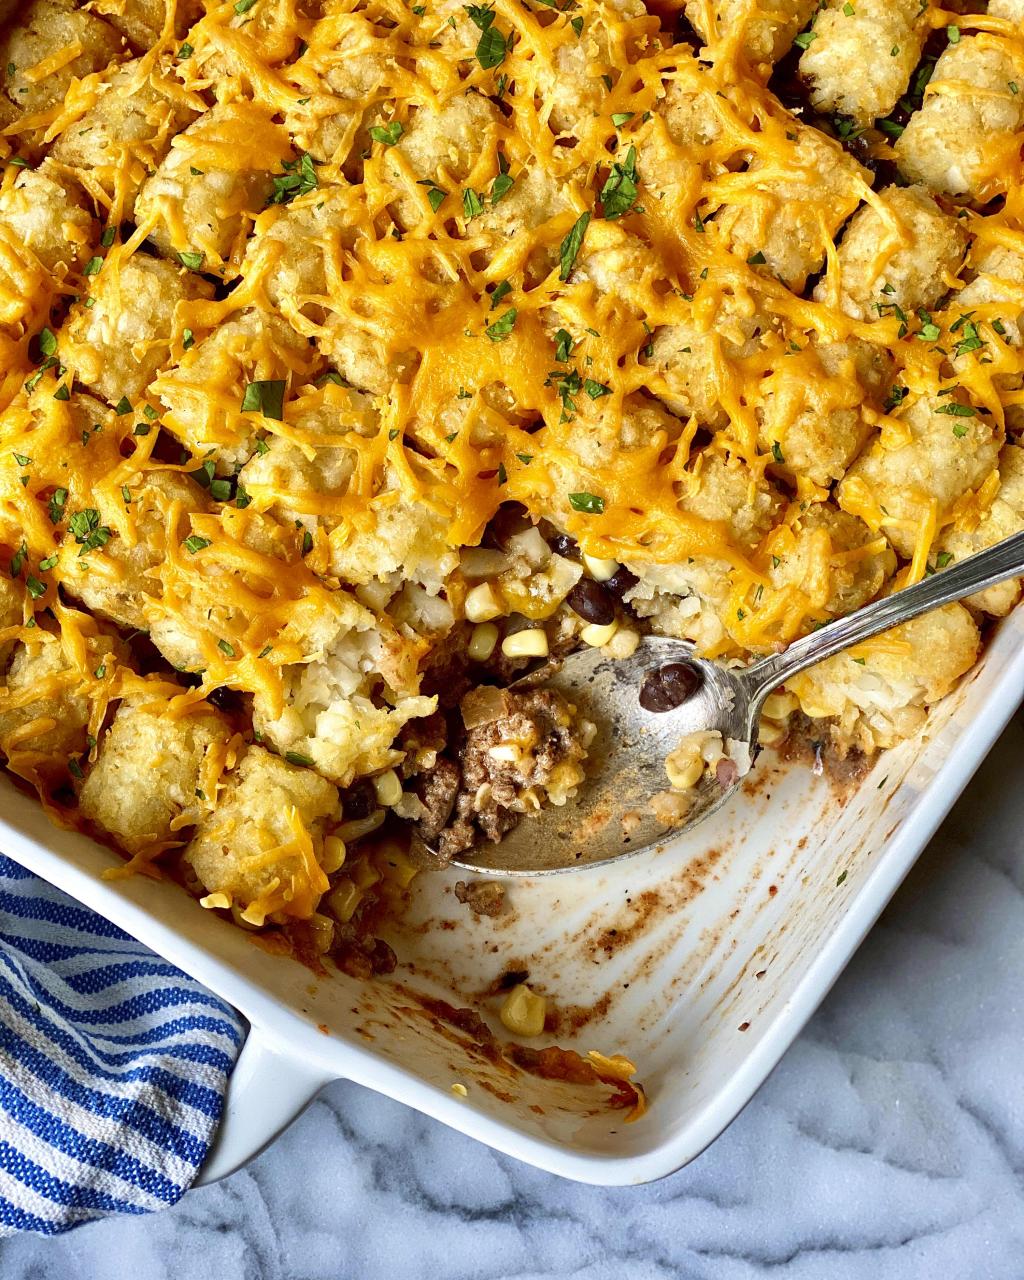 Cowboy Casserole Recipe (with Tater Tots) | The Kitchn